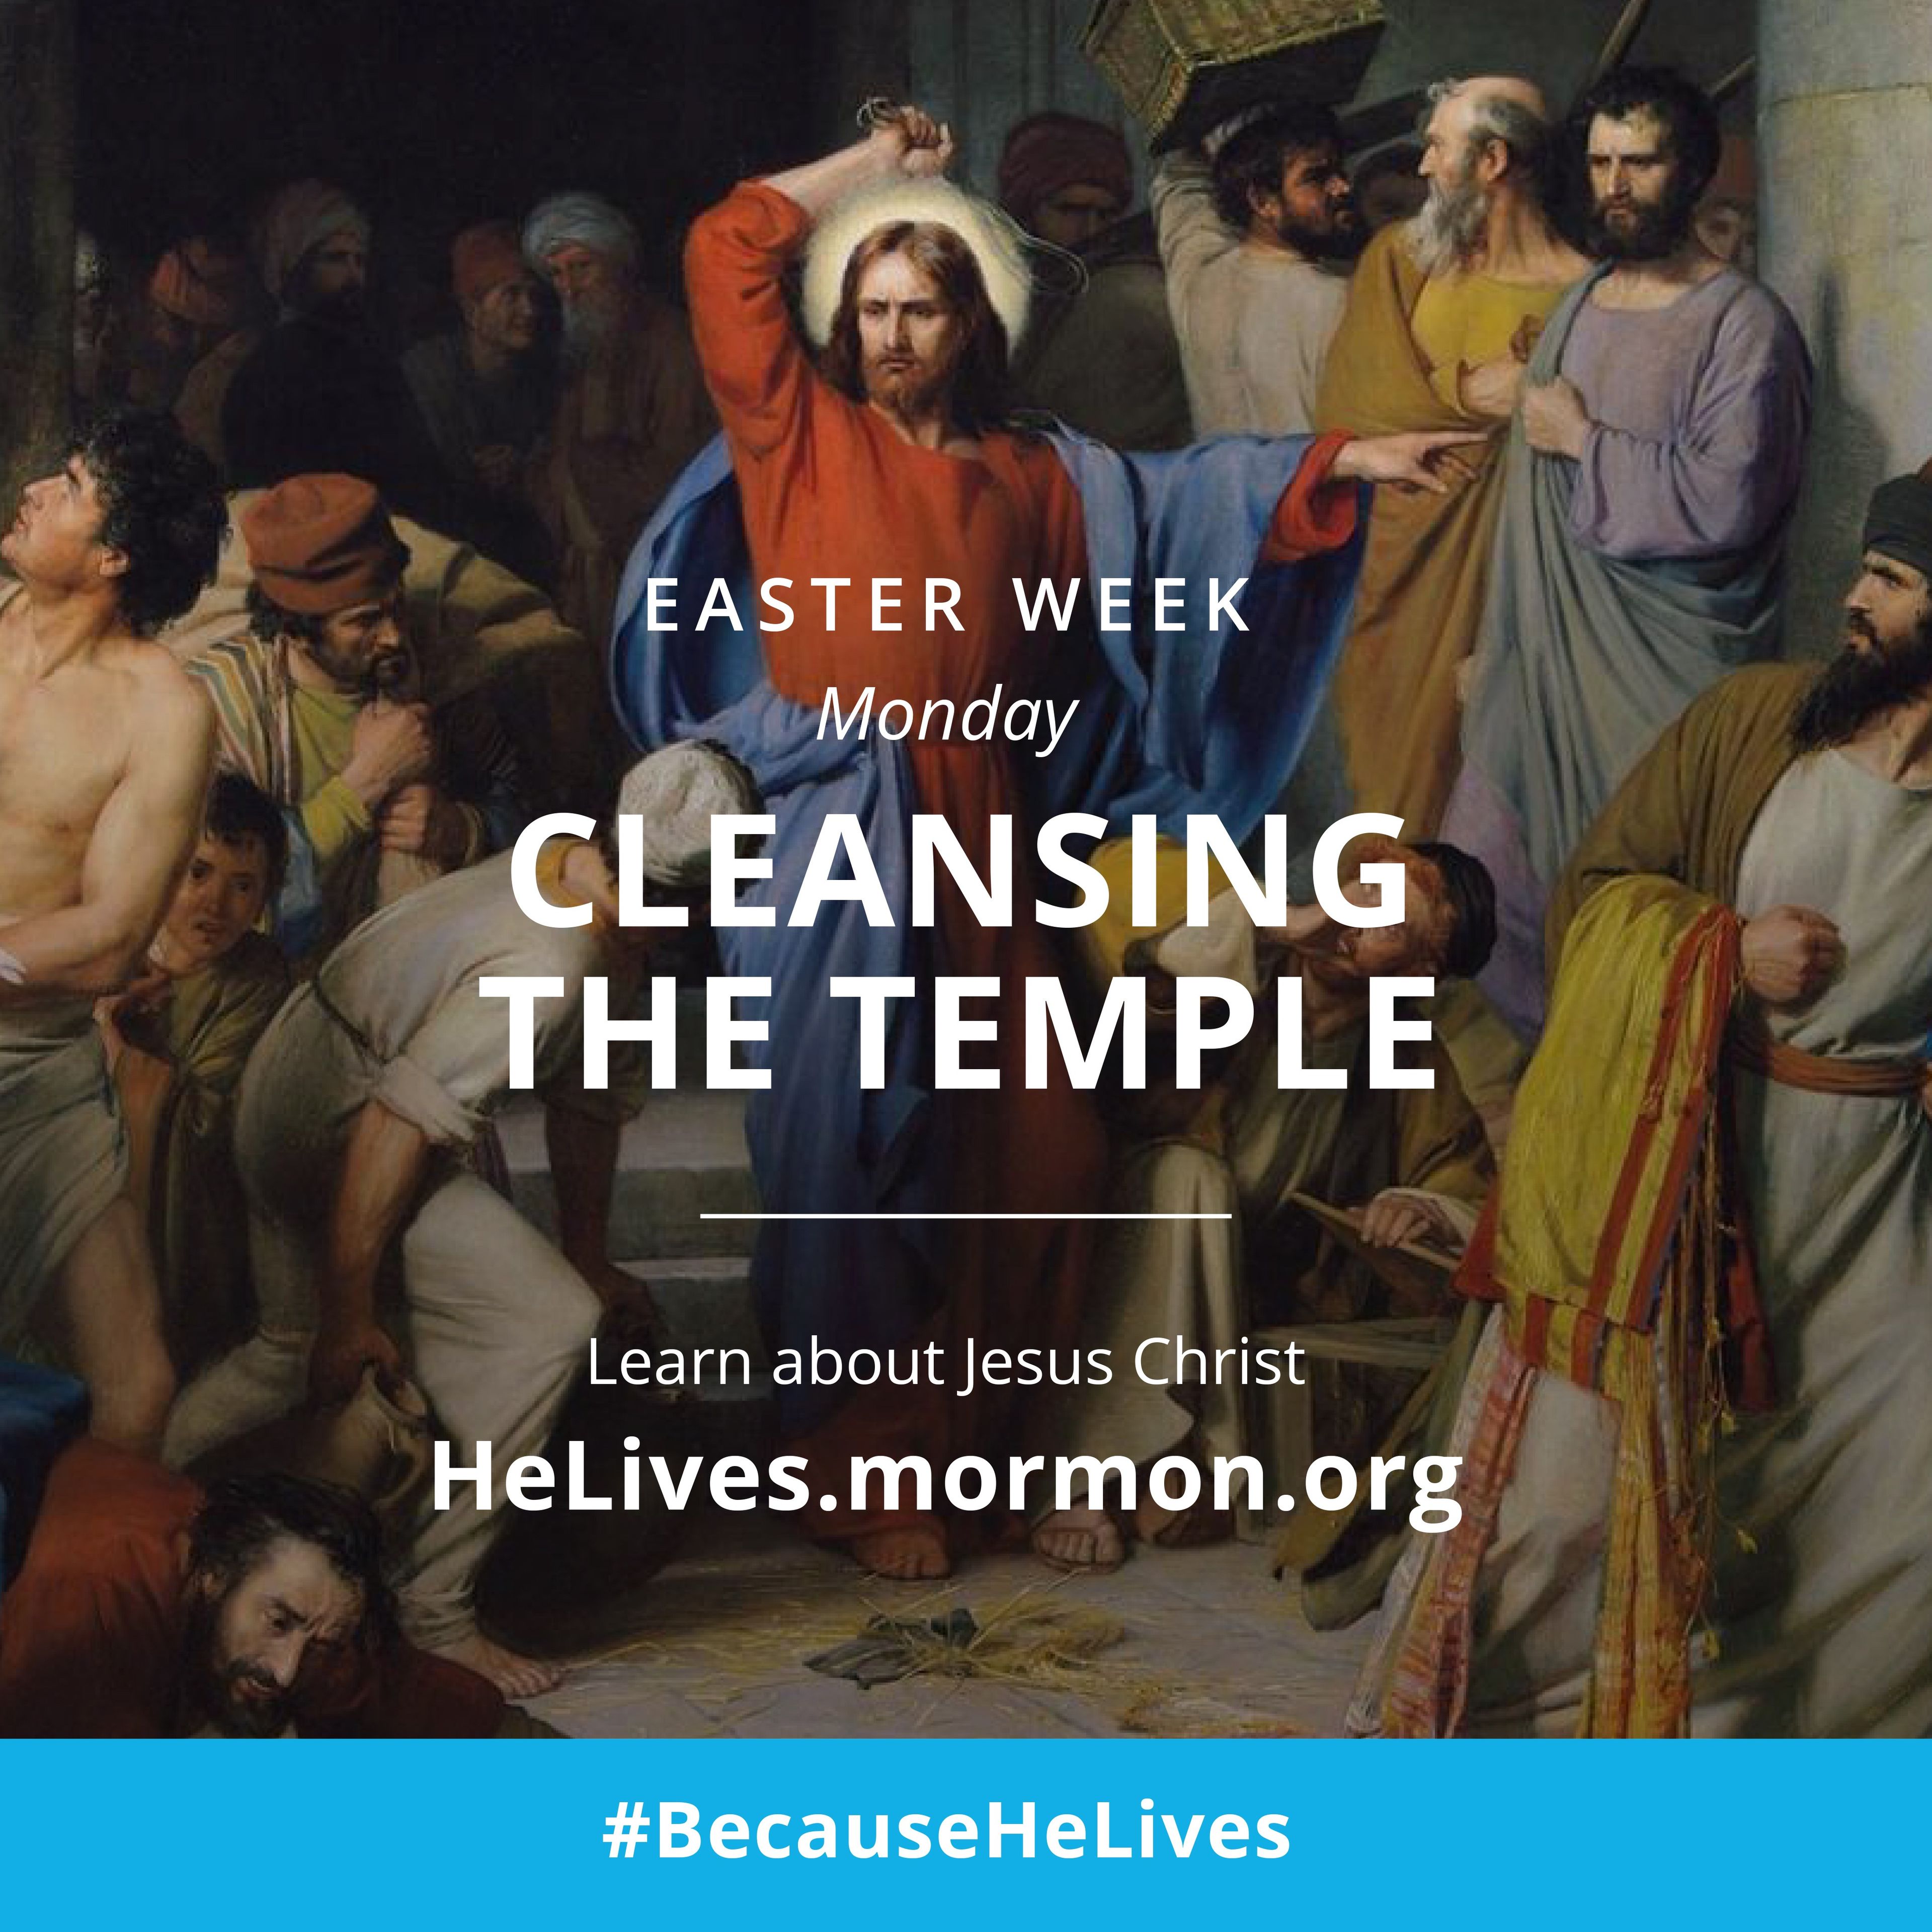 Easter week, Monday: cleansing the temple. Learn about Jesus Christ. #BecauseHeLives, HeLives.mormon.org